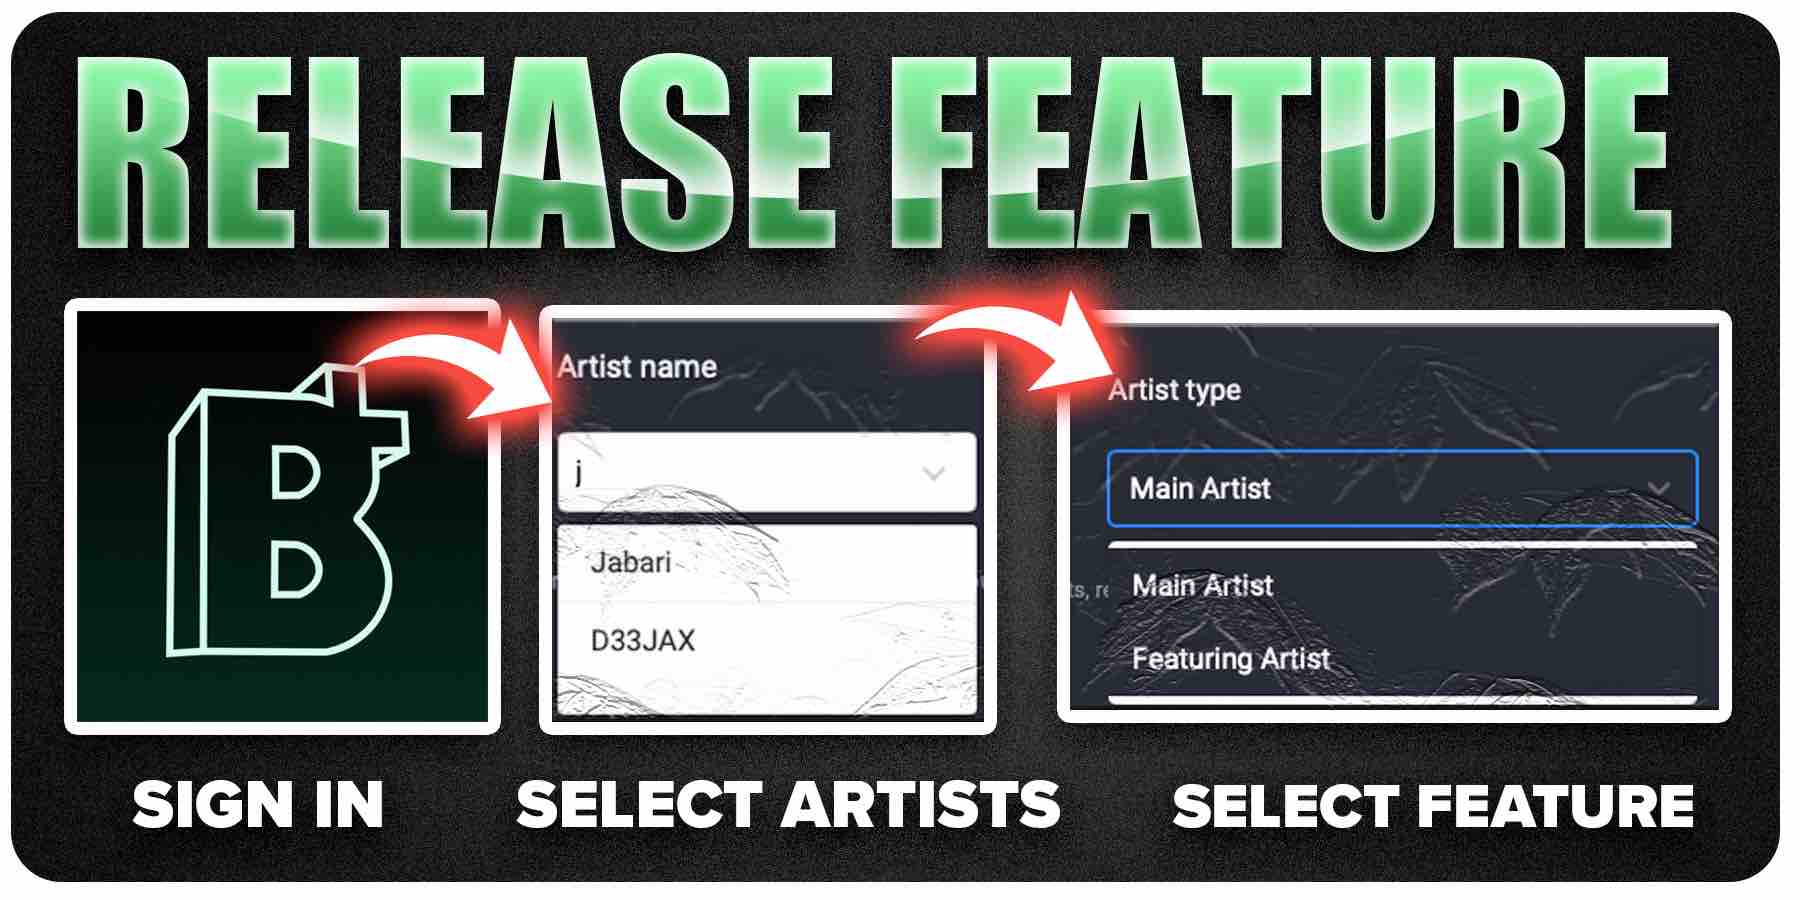 Set a Feature Artist on Release